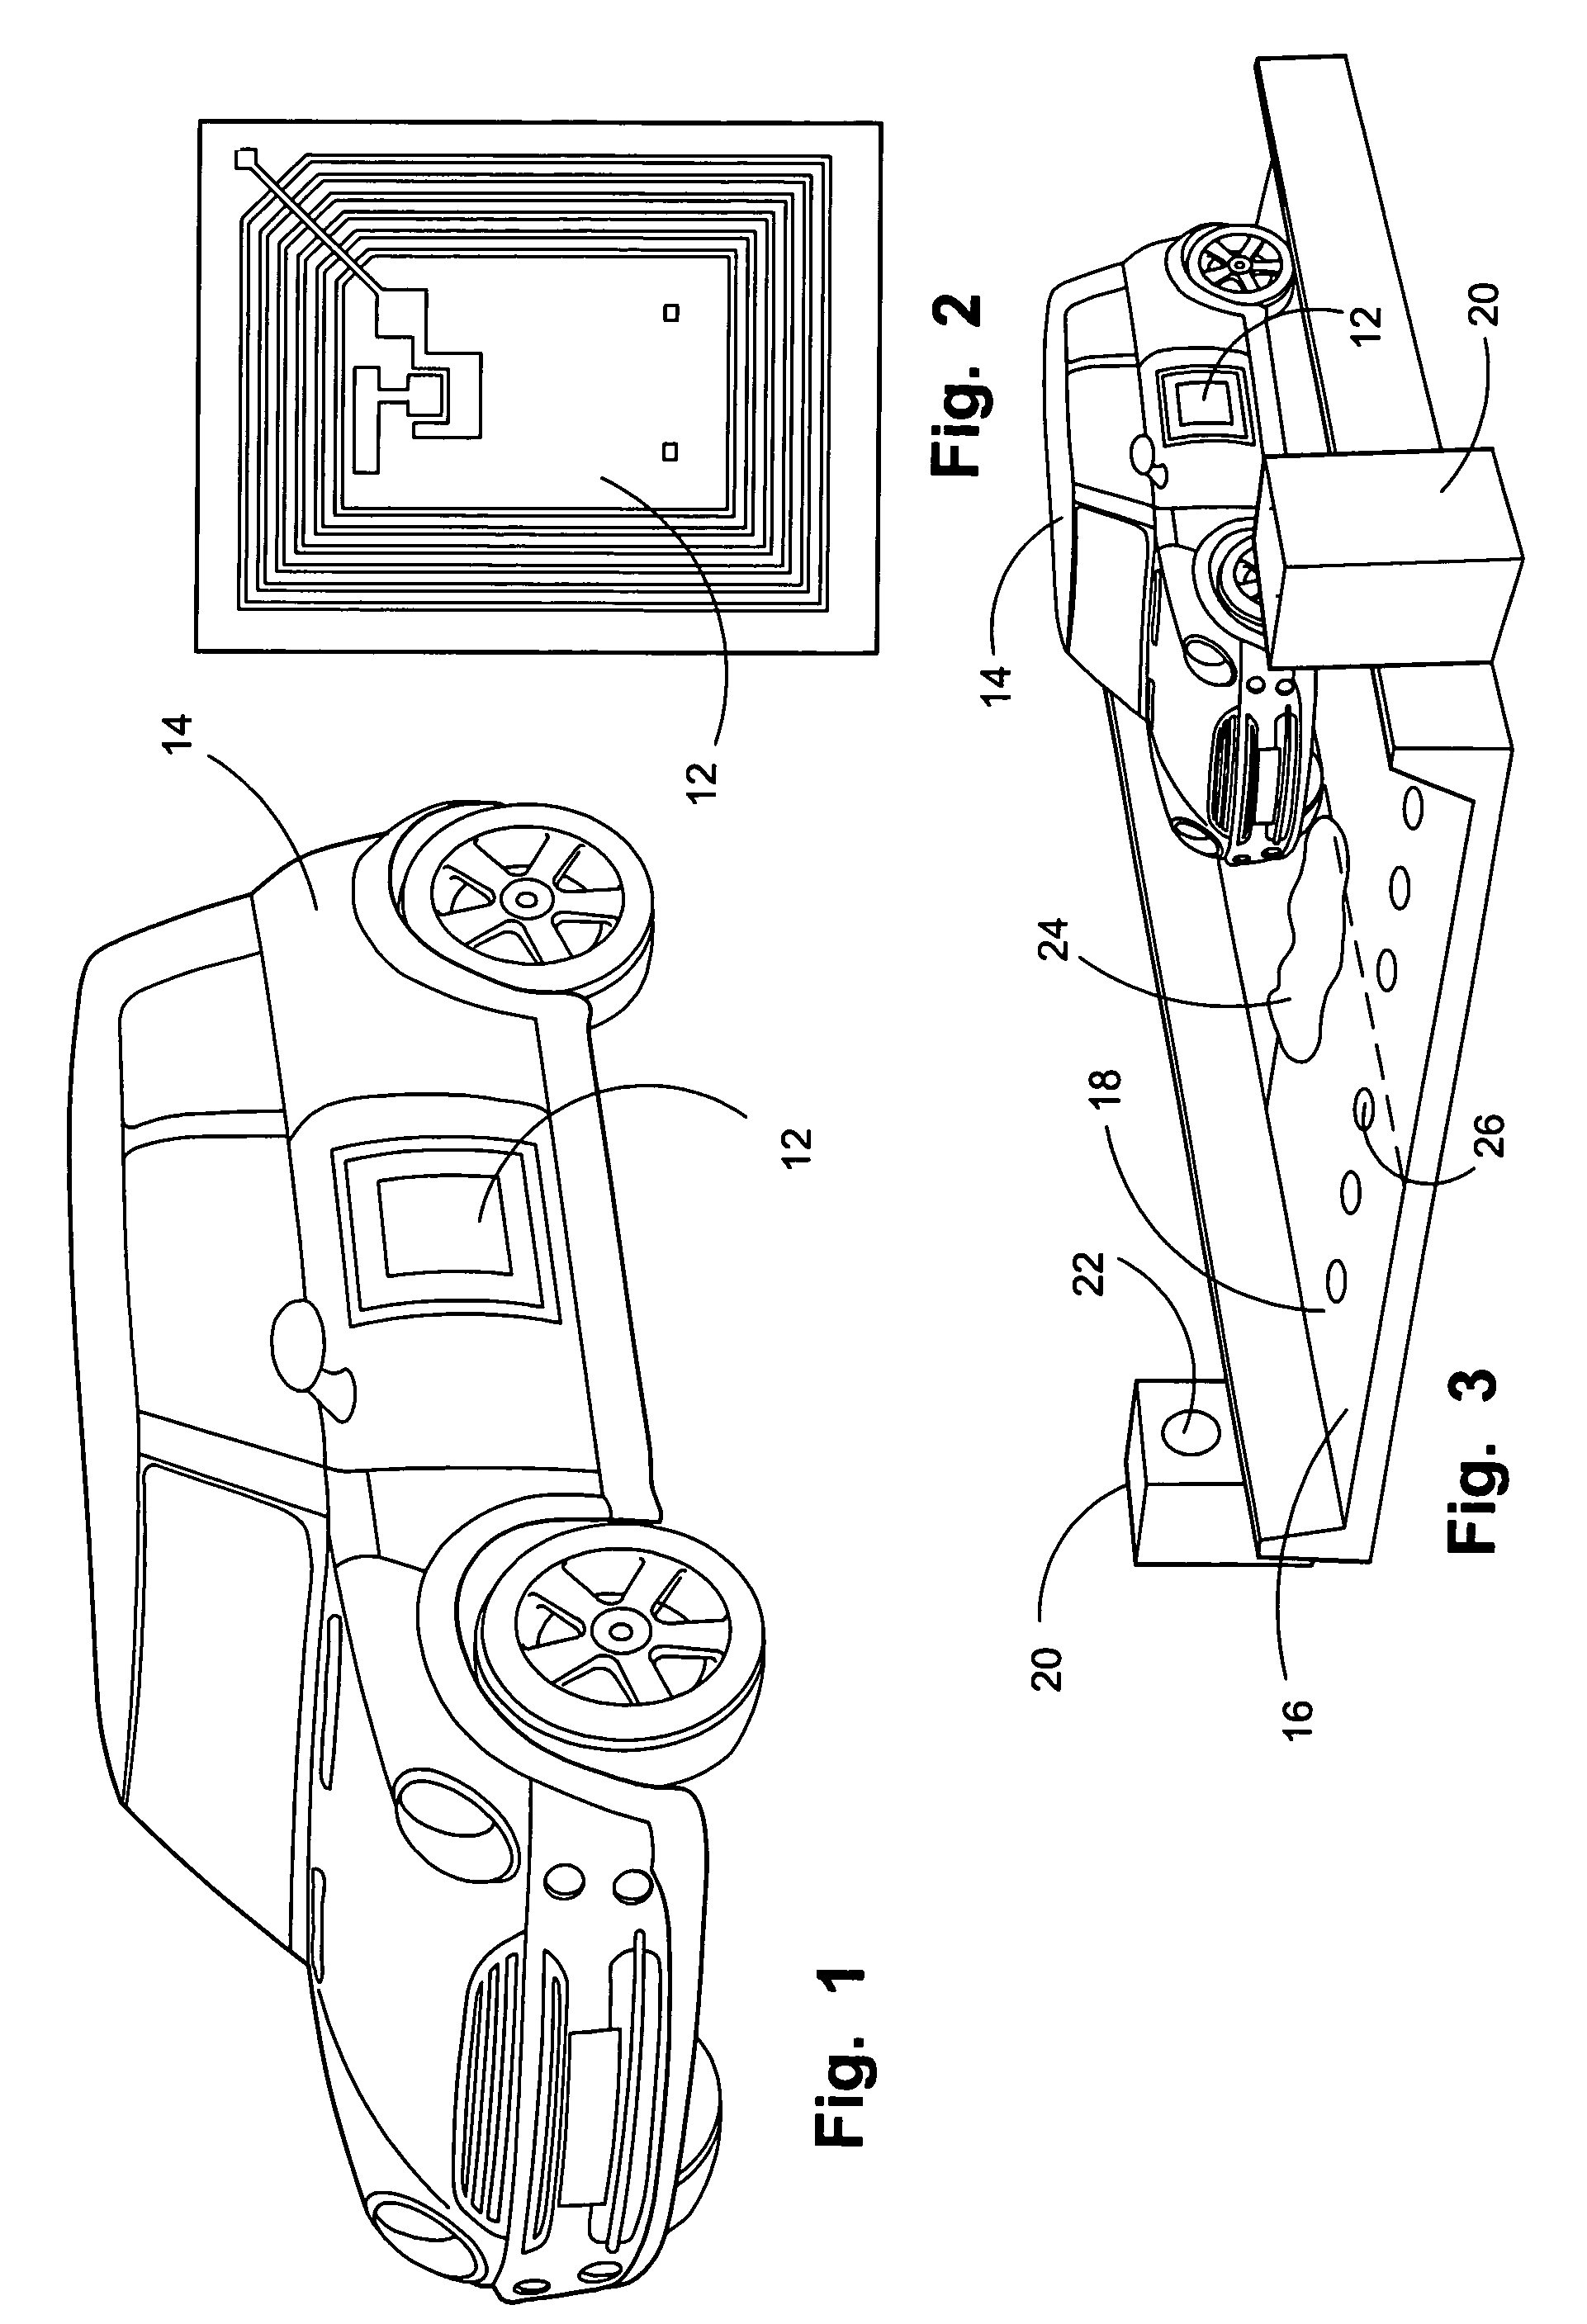 Method and apparatus for remote control vehicle identification